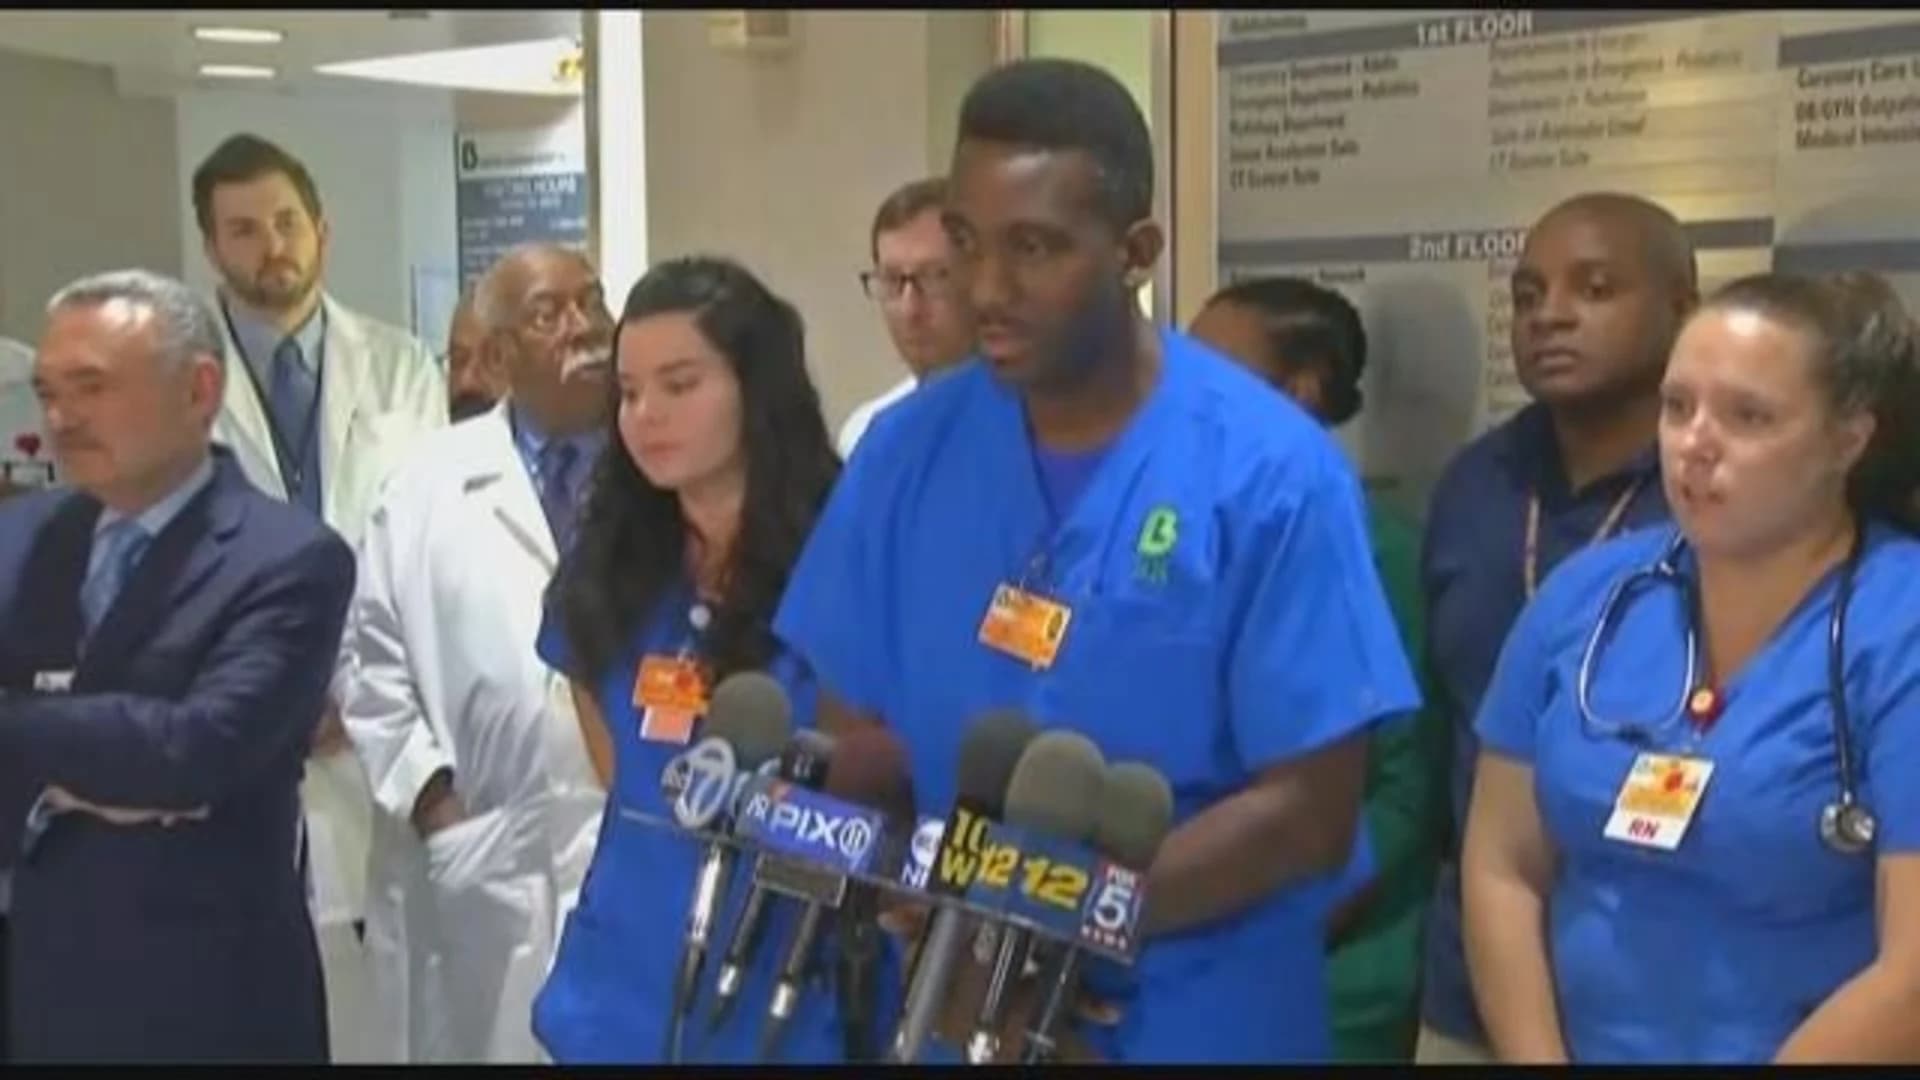 Bronx-Lebanon Hospital officials update conditions of shooting victims